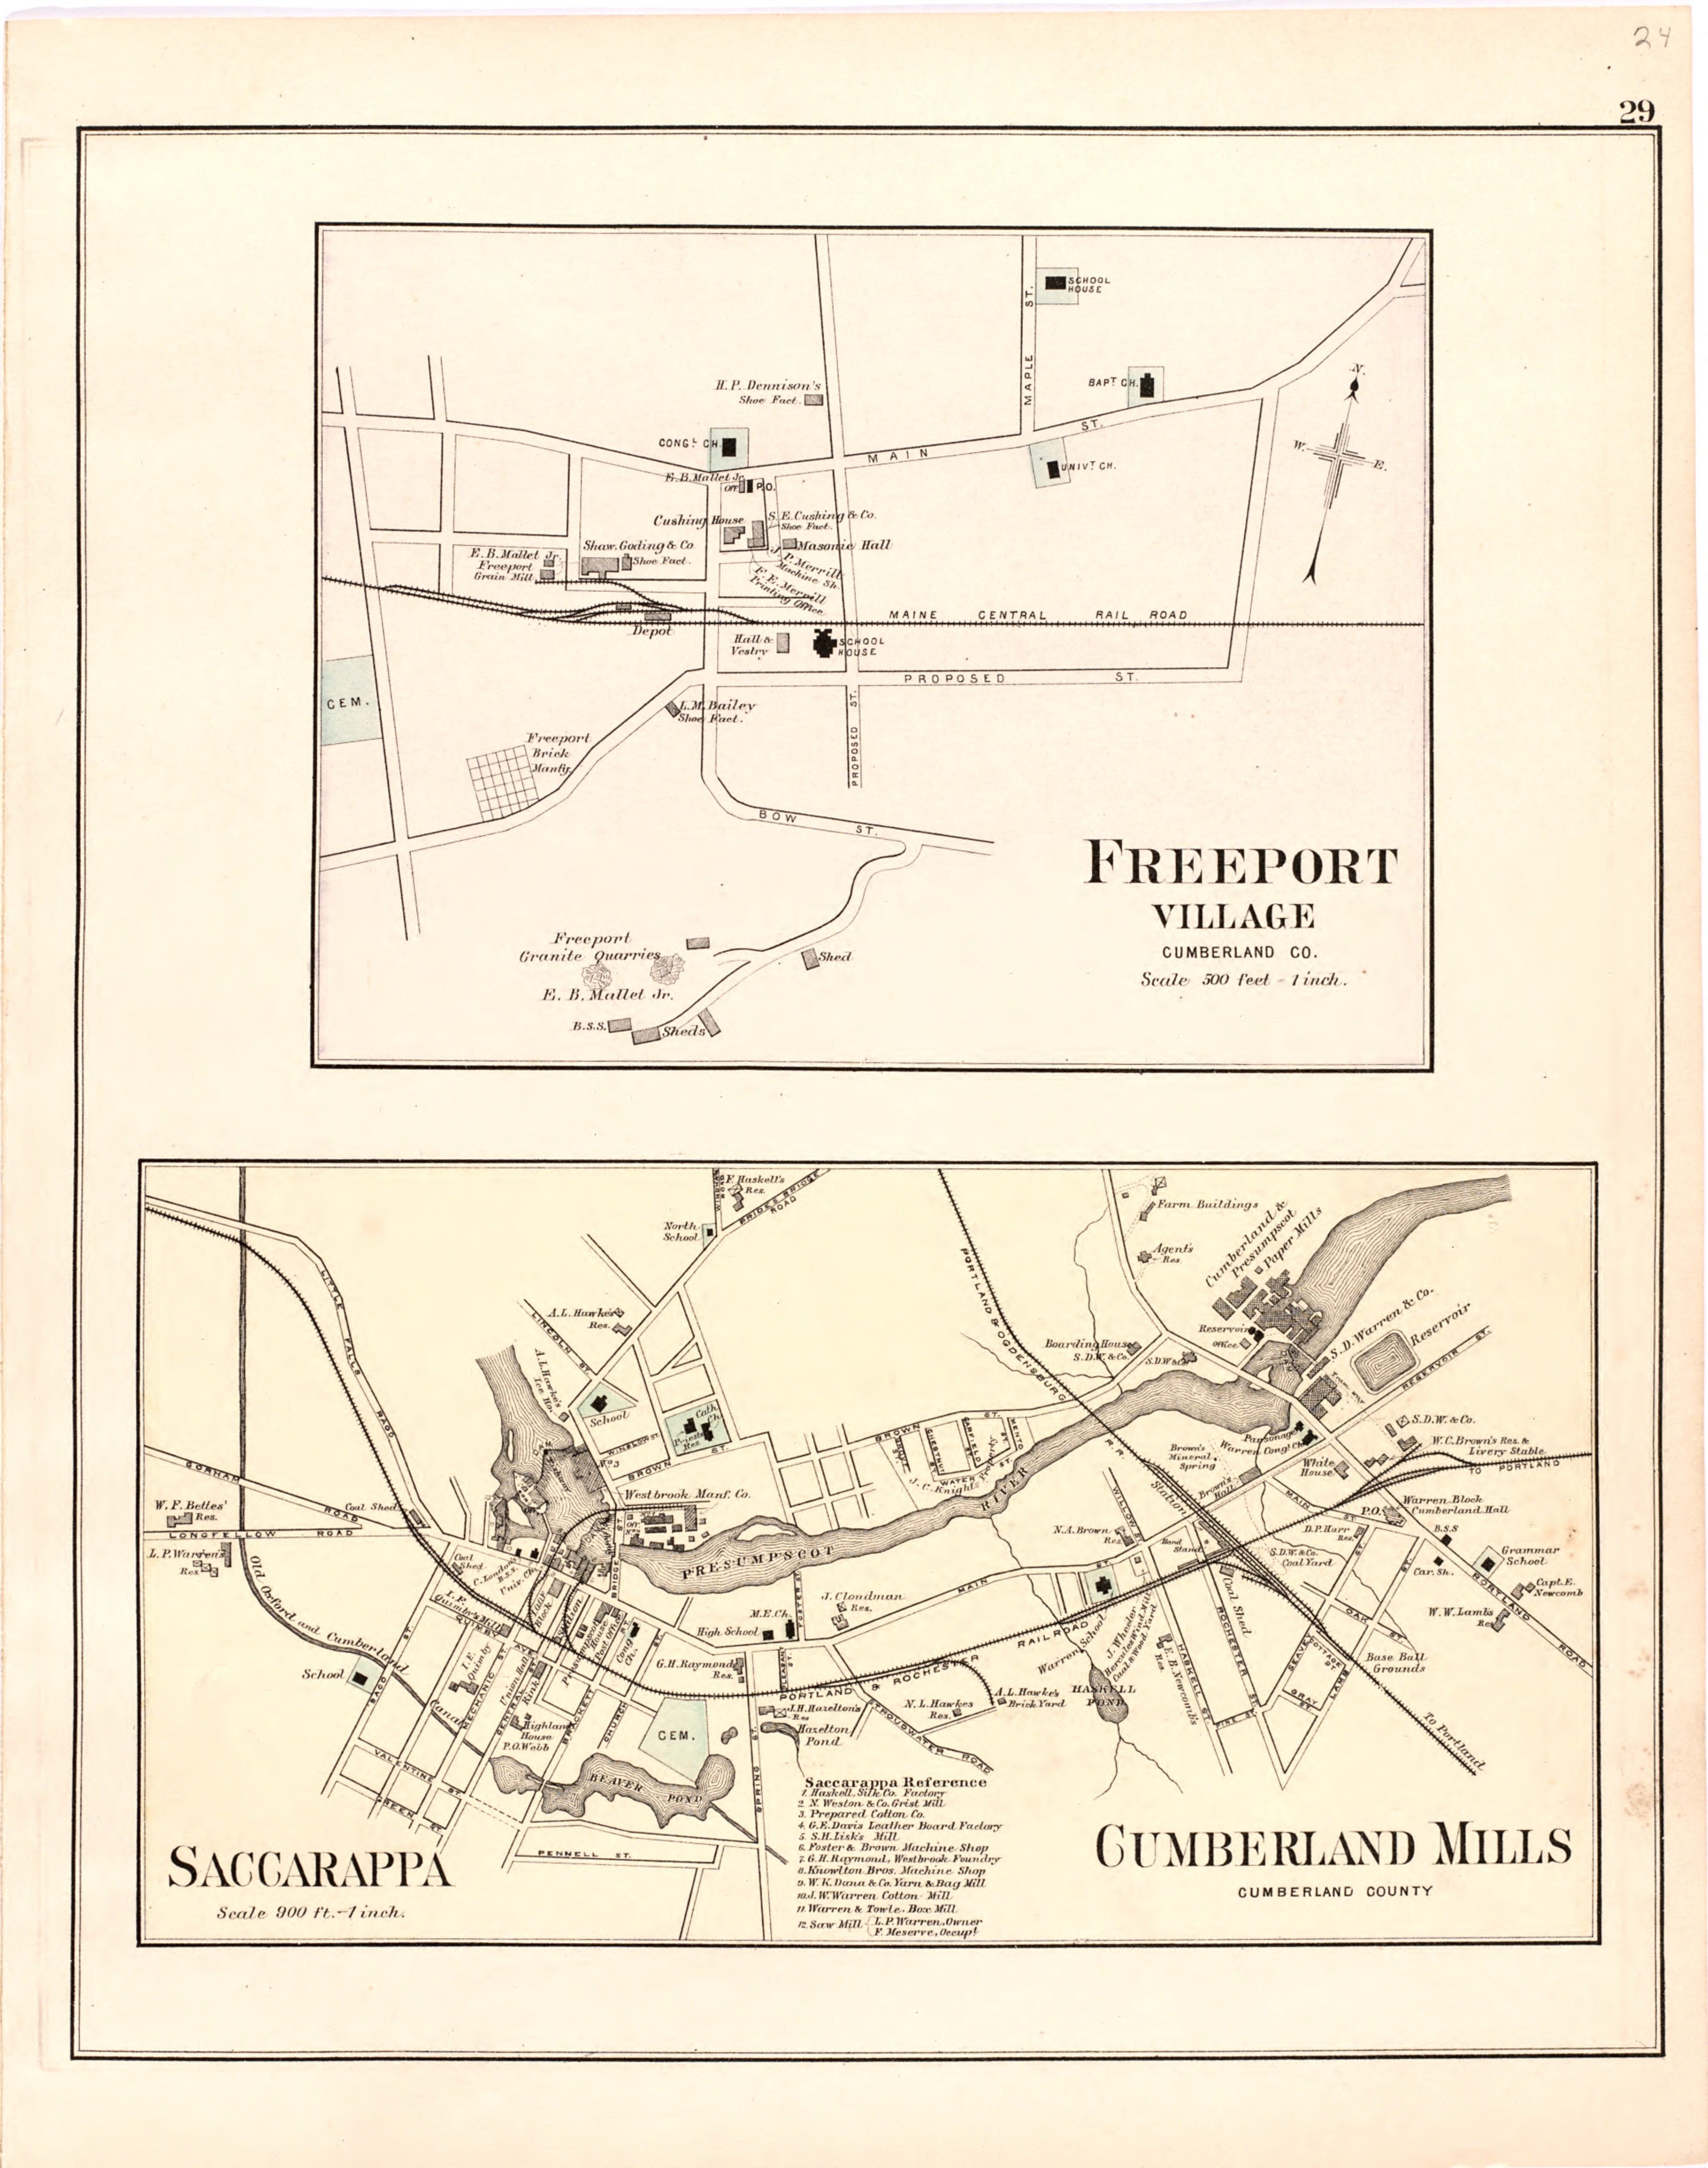 This hand drawn illustration (map) of Freeport Village; Saccarappa; Cumberland Mills from Colby&